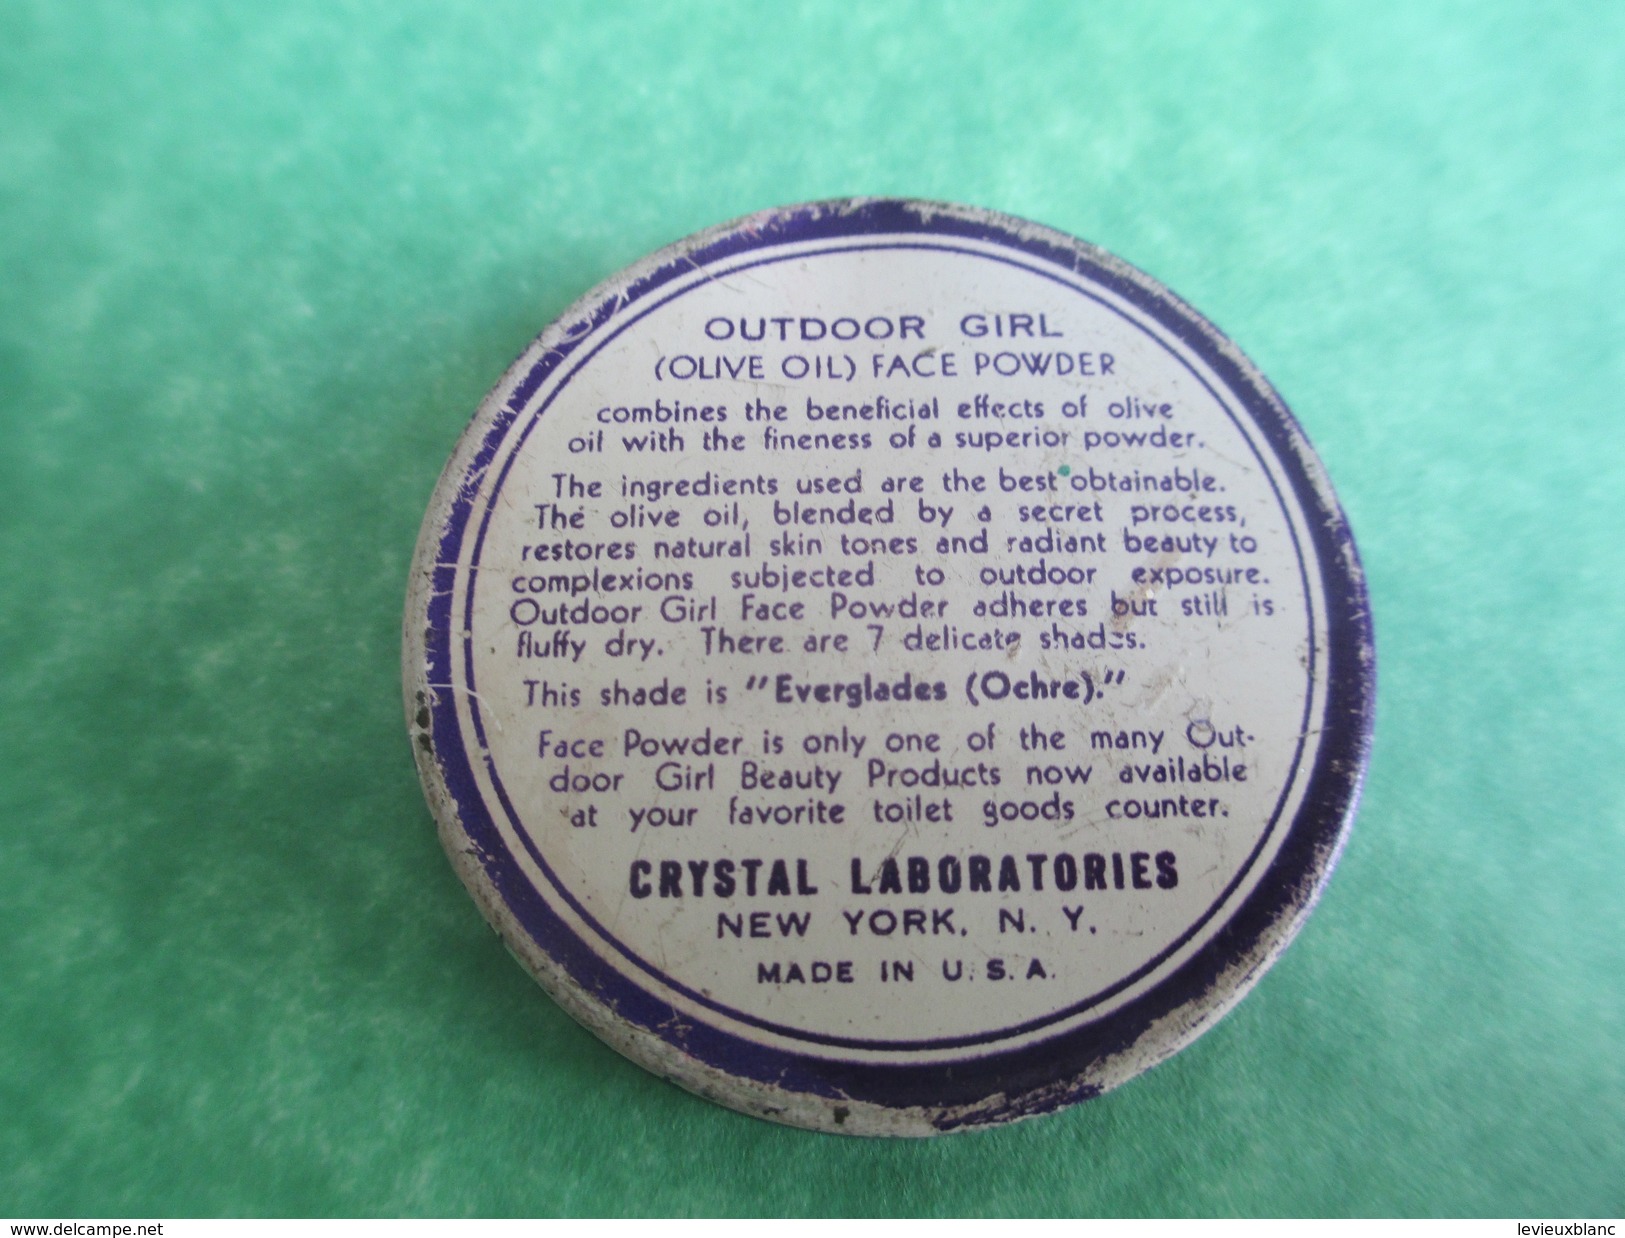 Face Powder/Outdoor Girl/The Olive Oil /Crystal Laboratories/New York/USA Petite Boite Métallique/Vers 1960-1970  PARF94 - Beauty Products